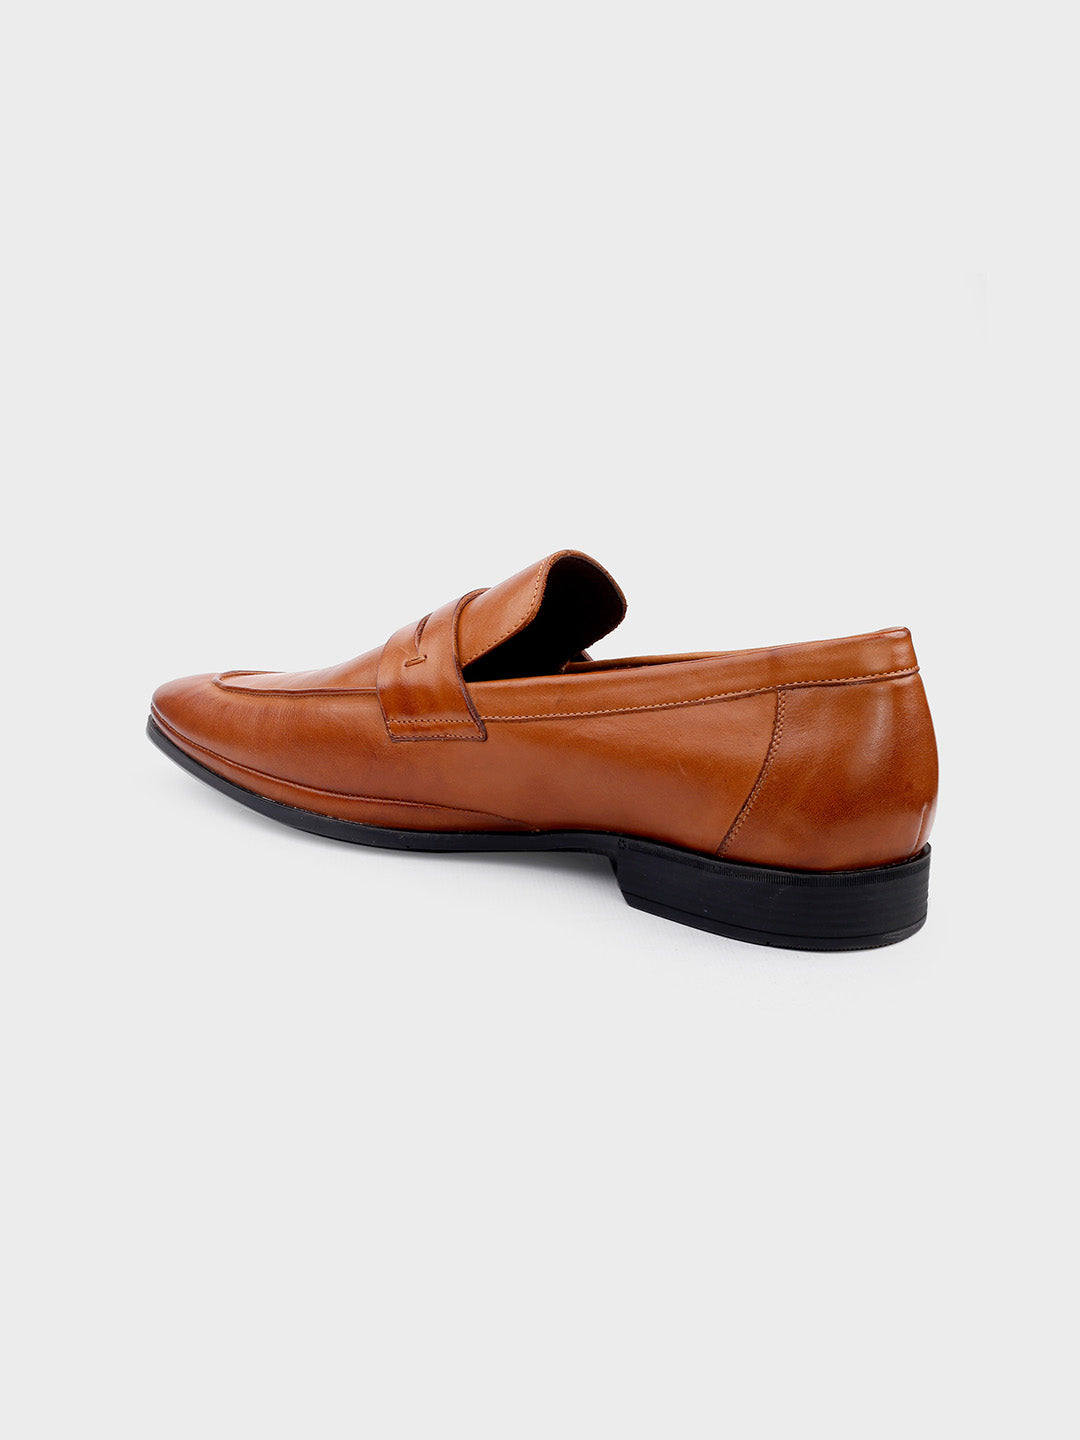 Tan Leather Men's Slip-On Loafers